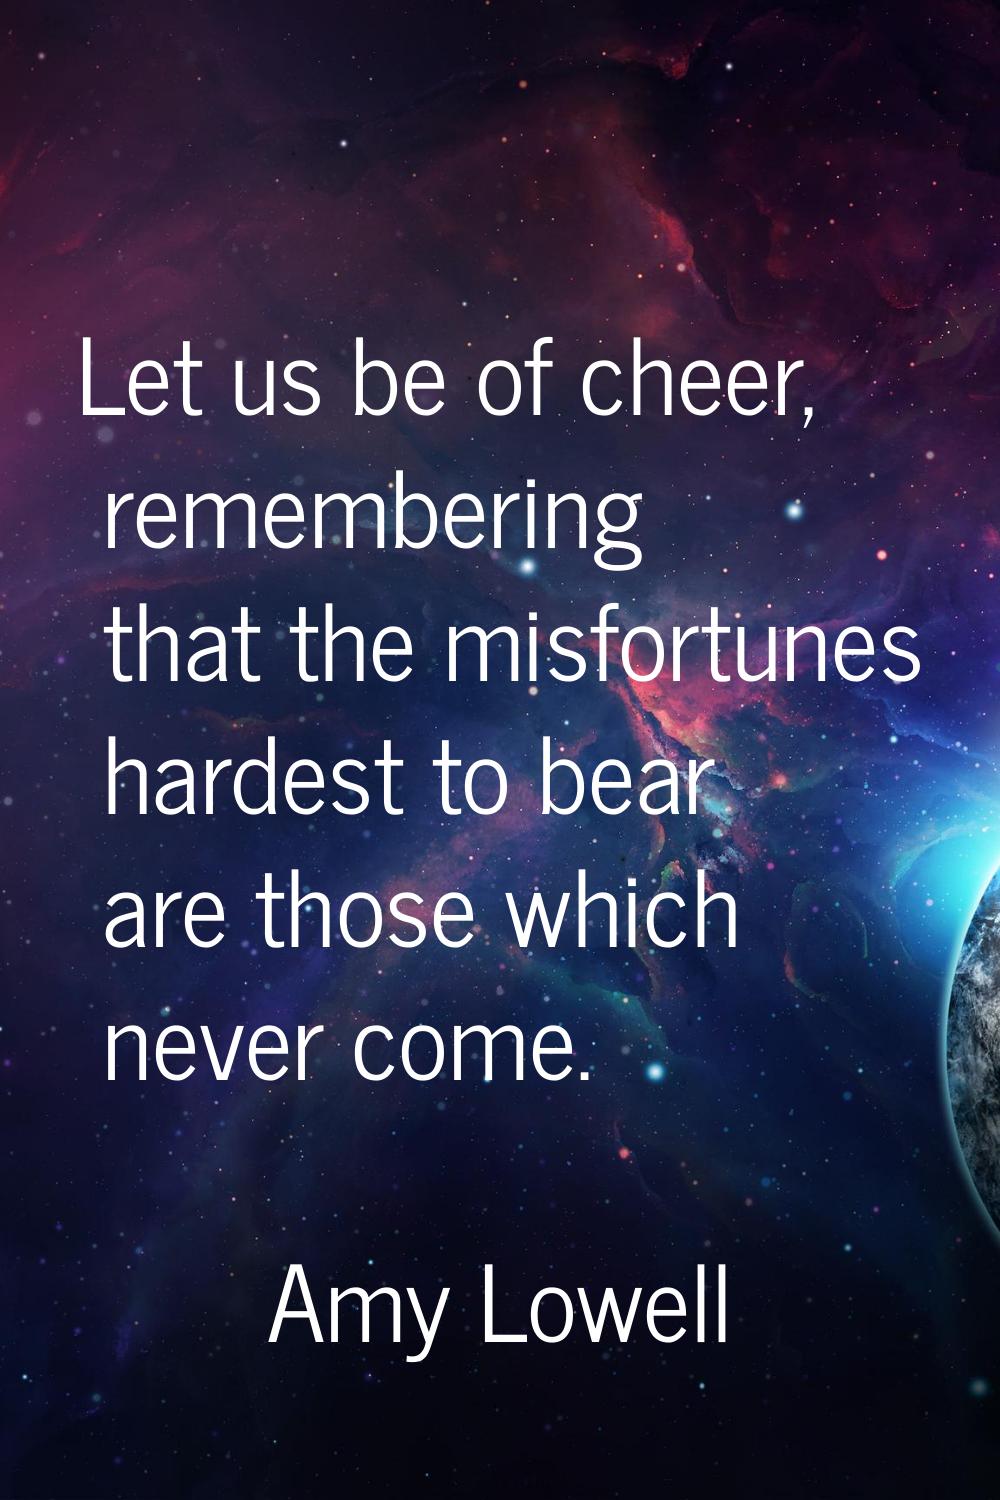 Let us be of cheer, remembering that the misfortunes hardest to bear are those which never come.